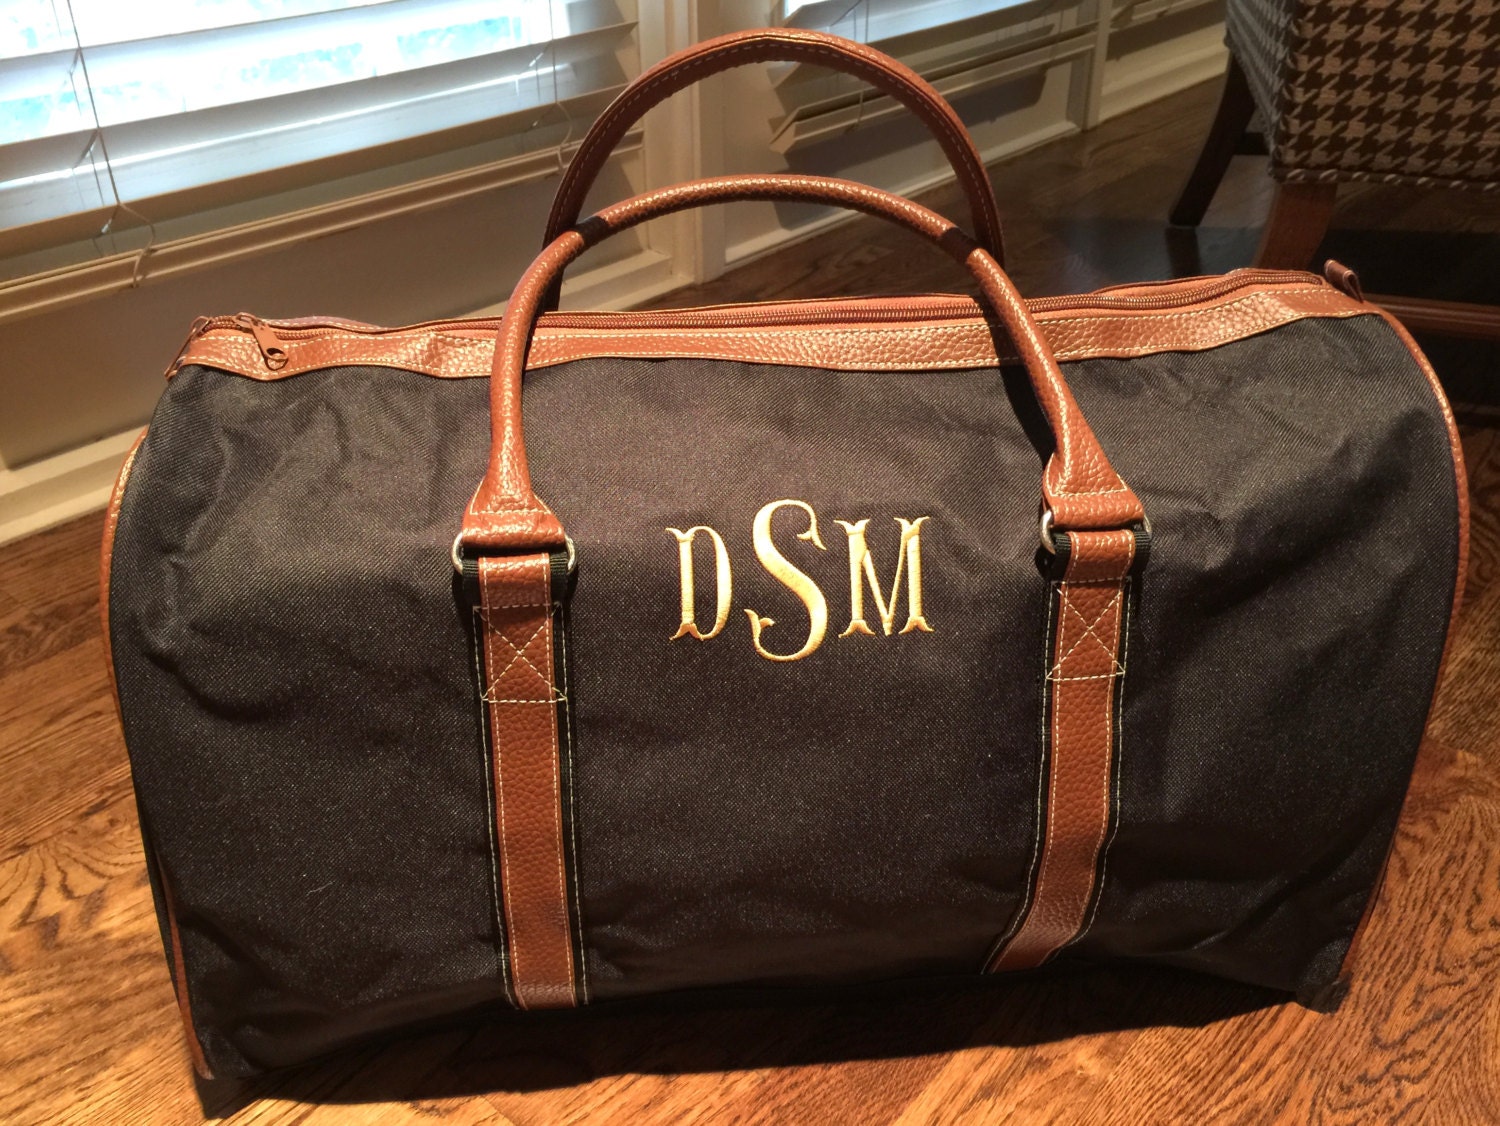 Personalized Duffle Bag Monogrammed Overnight Bag Duffle